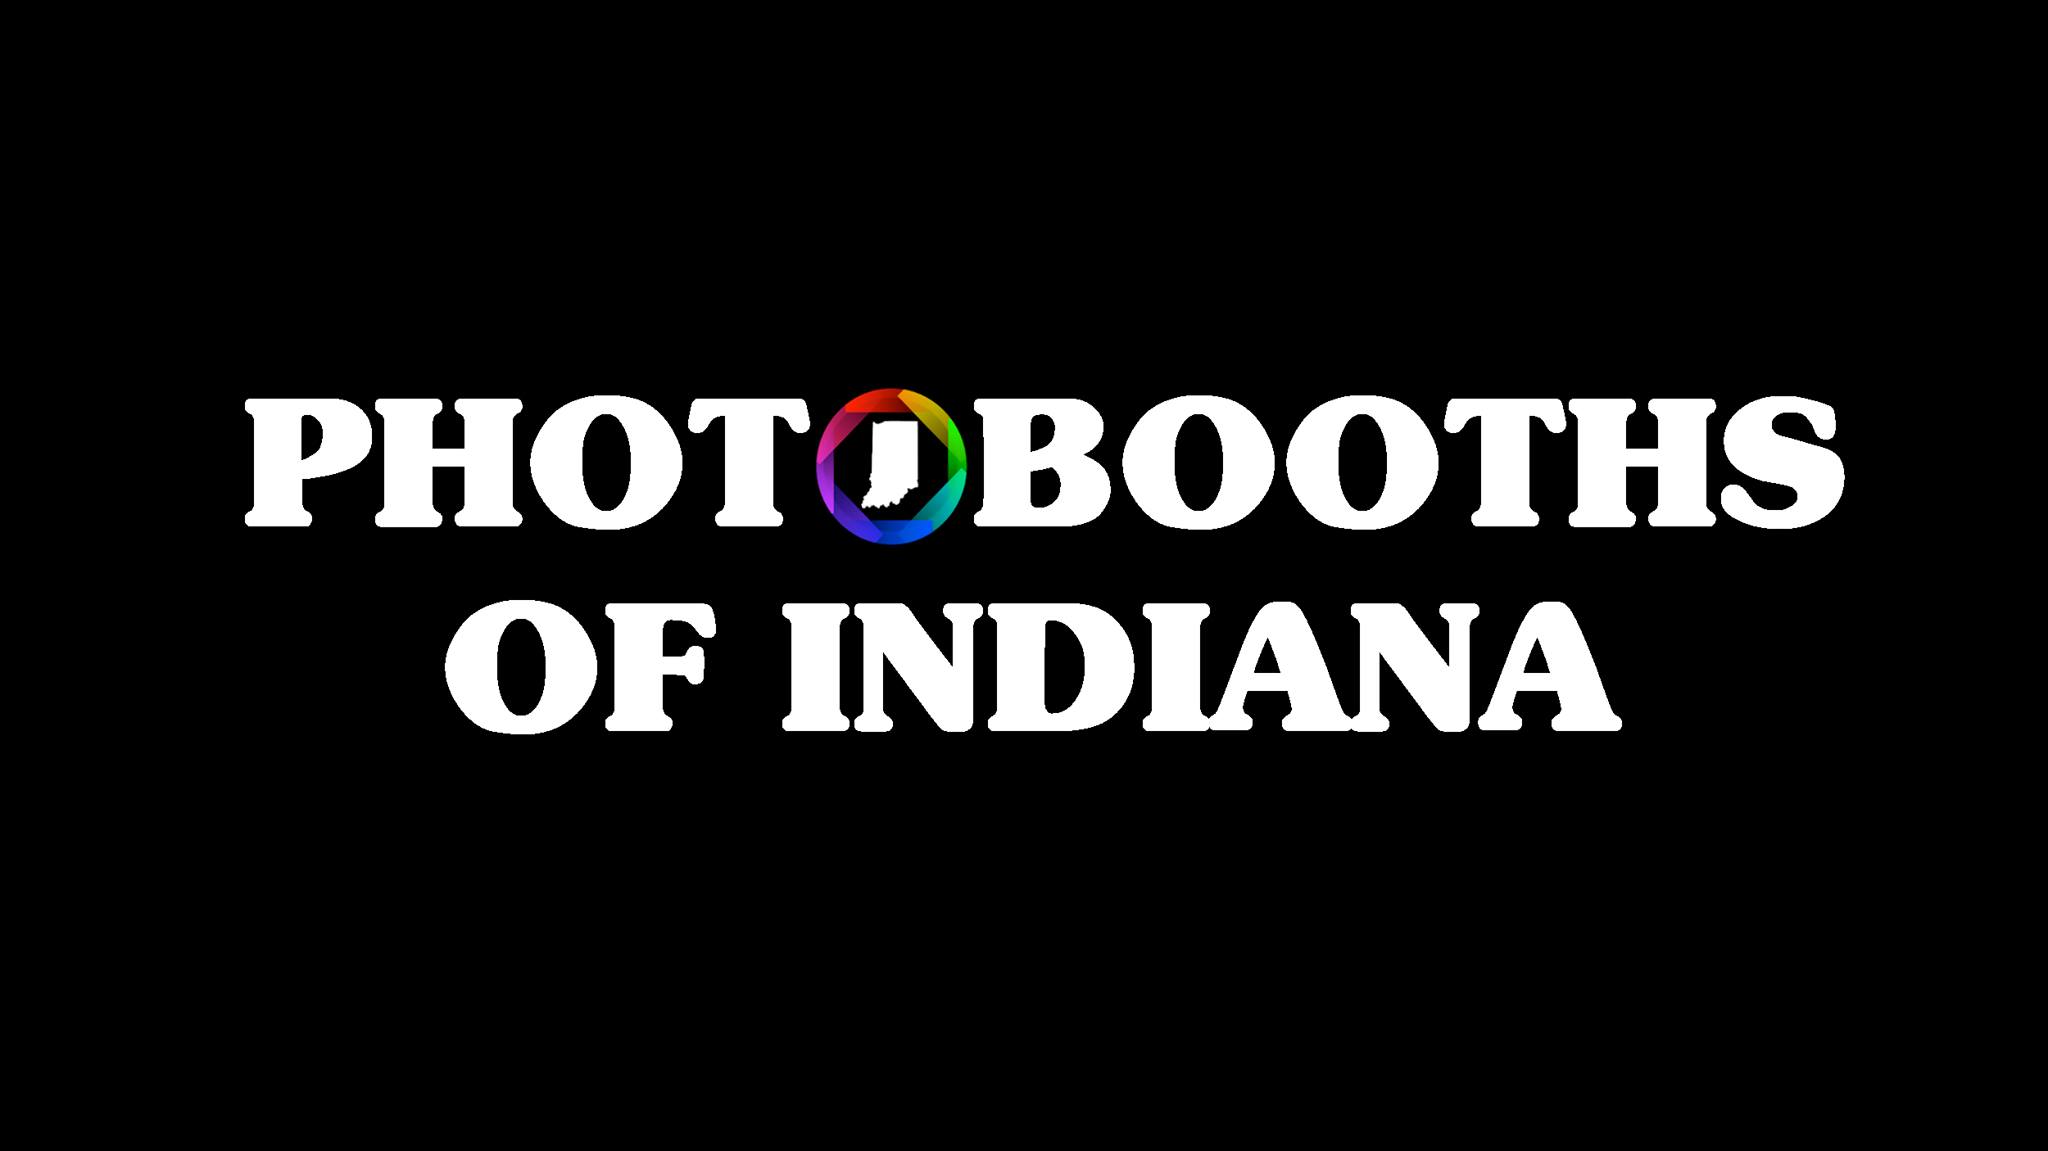 Mirror, 360, Social, Selfie Station, Enclosed, Green Screen, Glam Booths, And More Photo Booths Of Indiana Logo